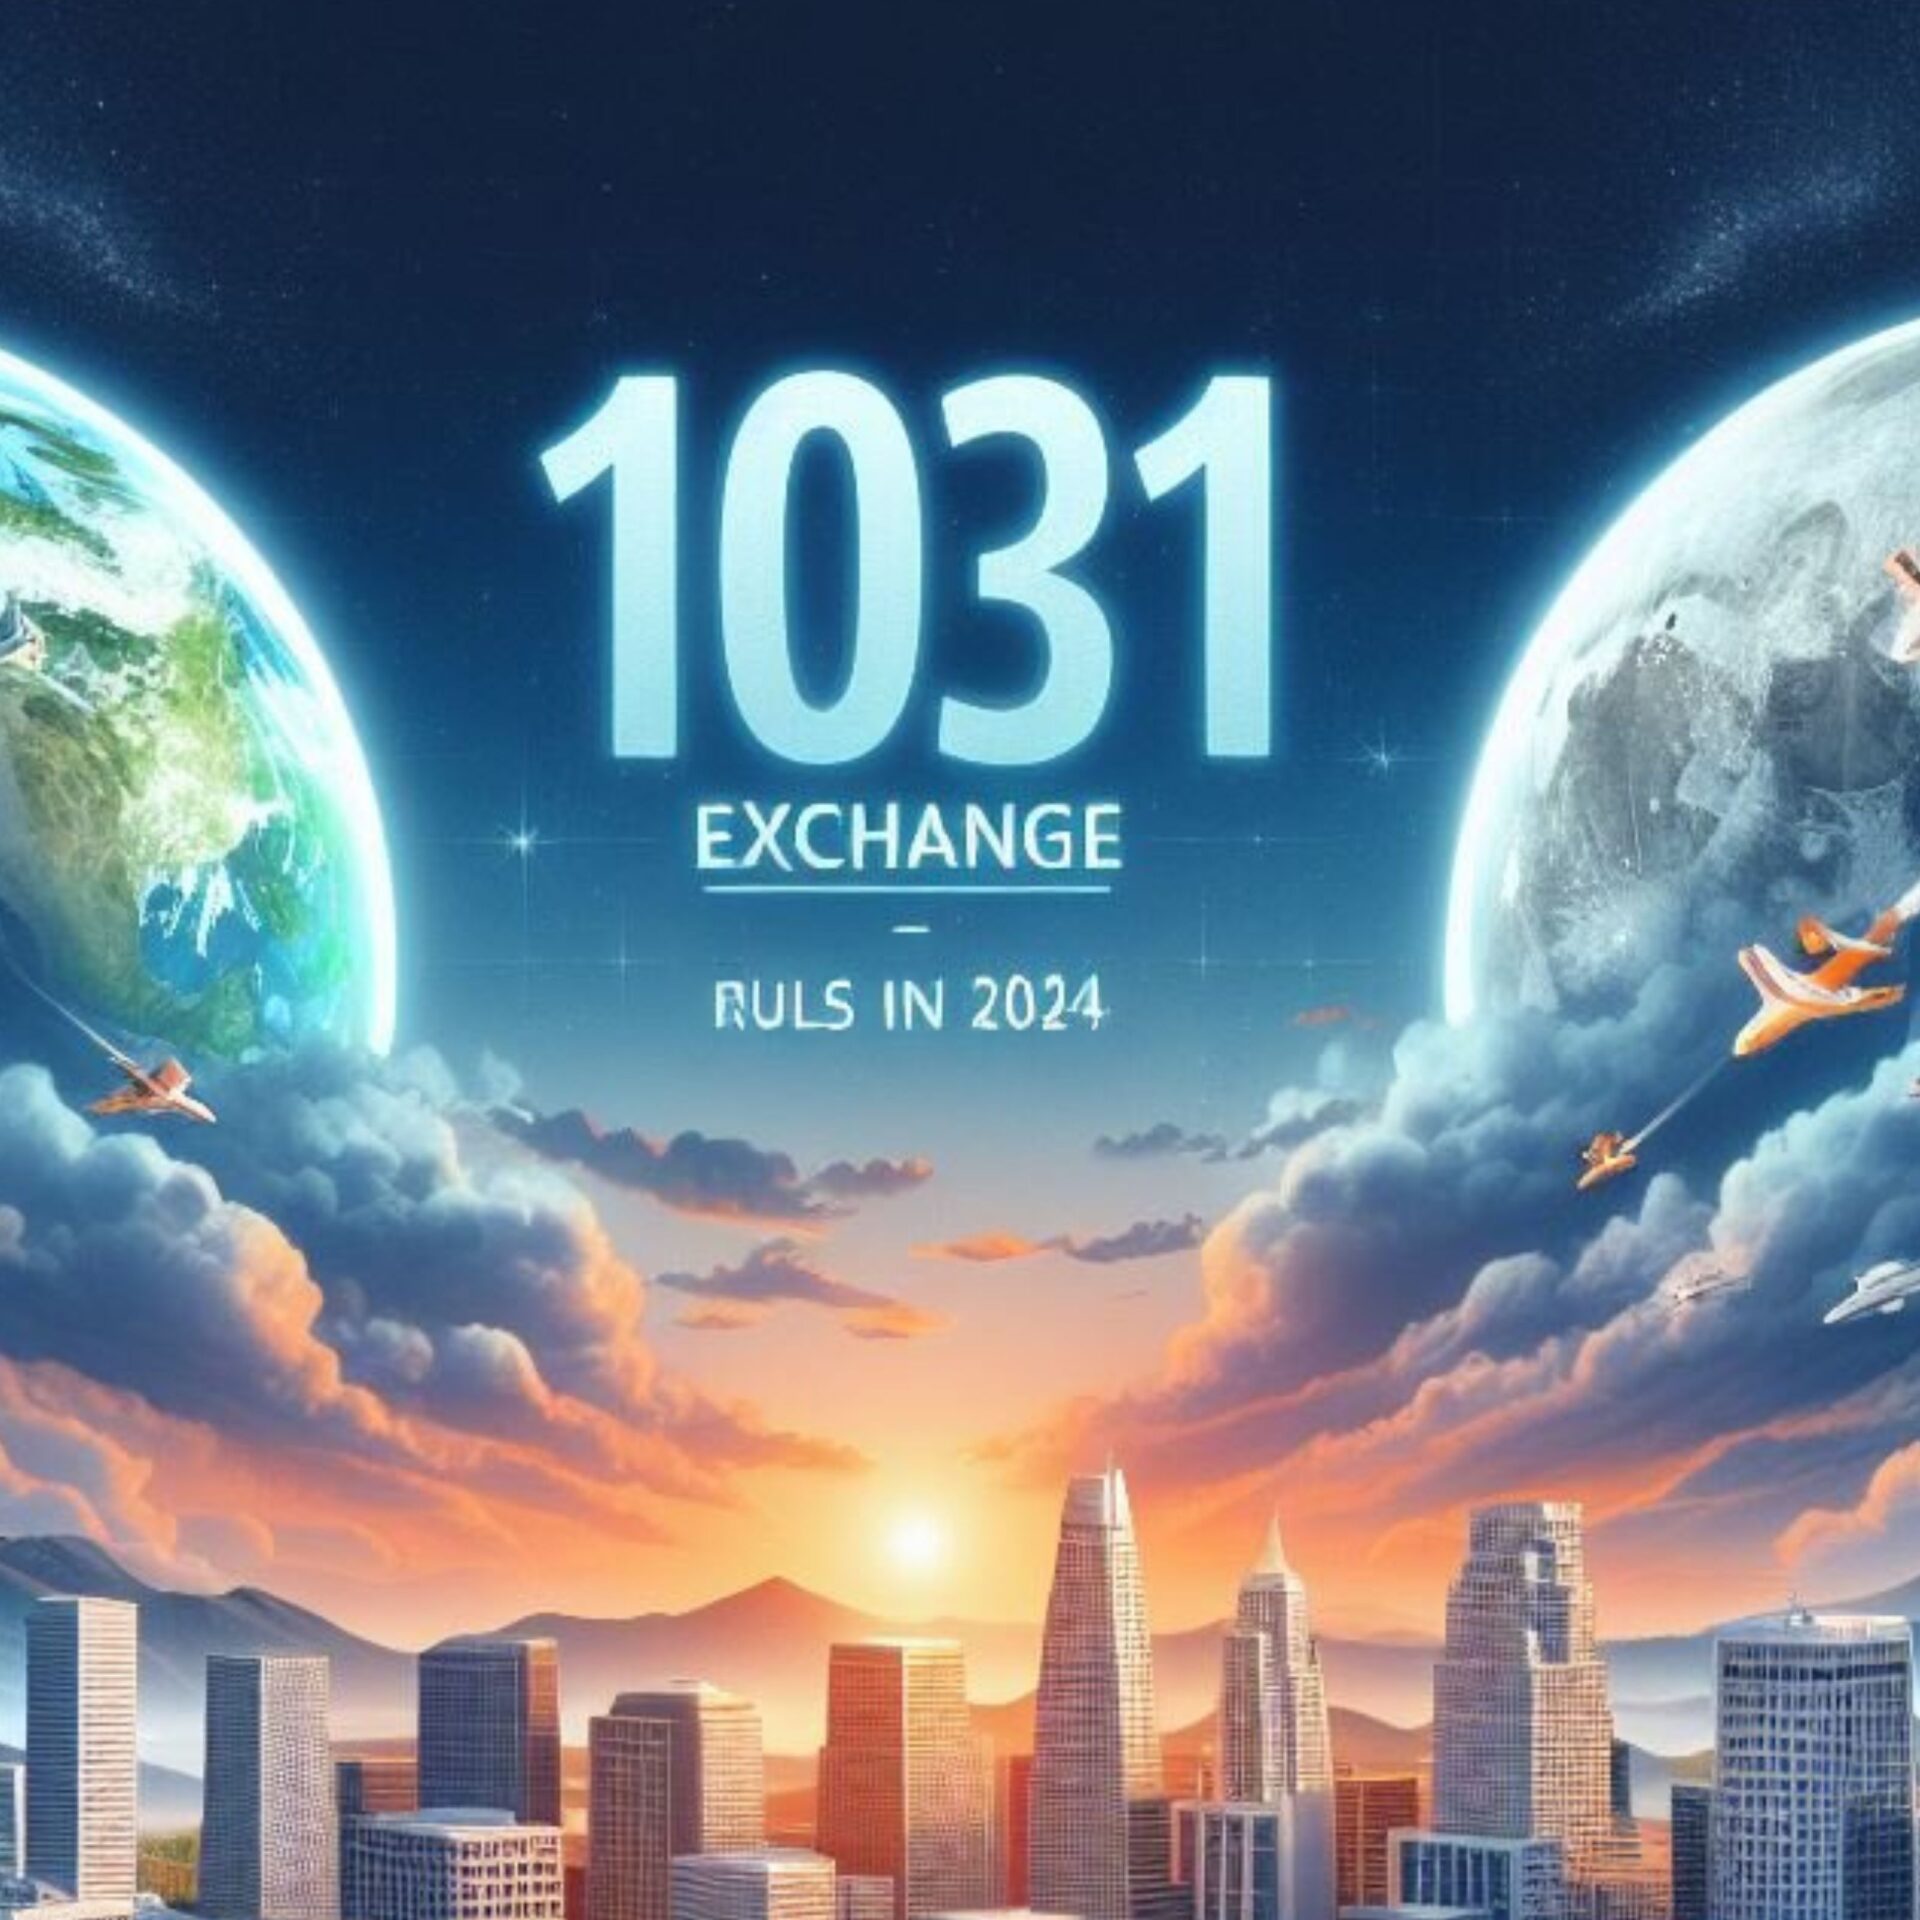 Rules for 1031 Exchange in 2024